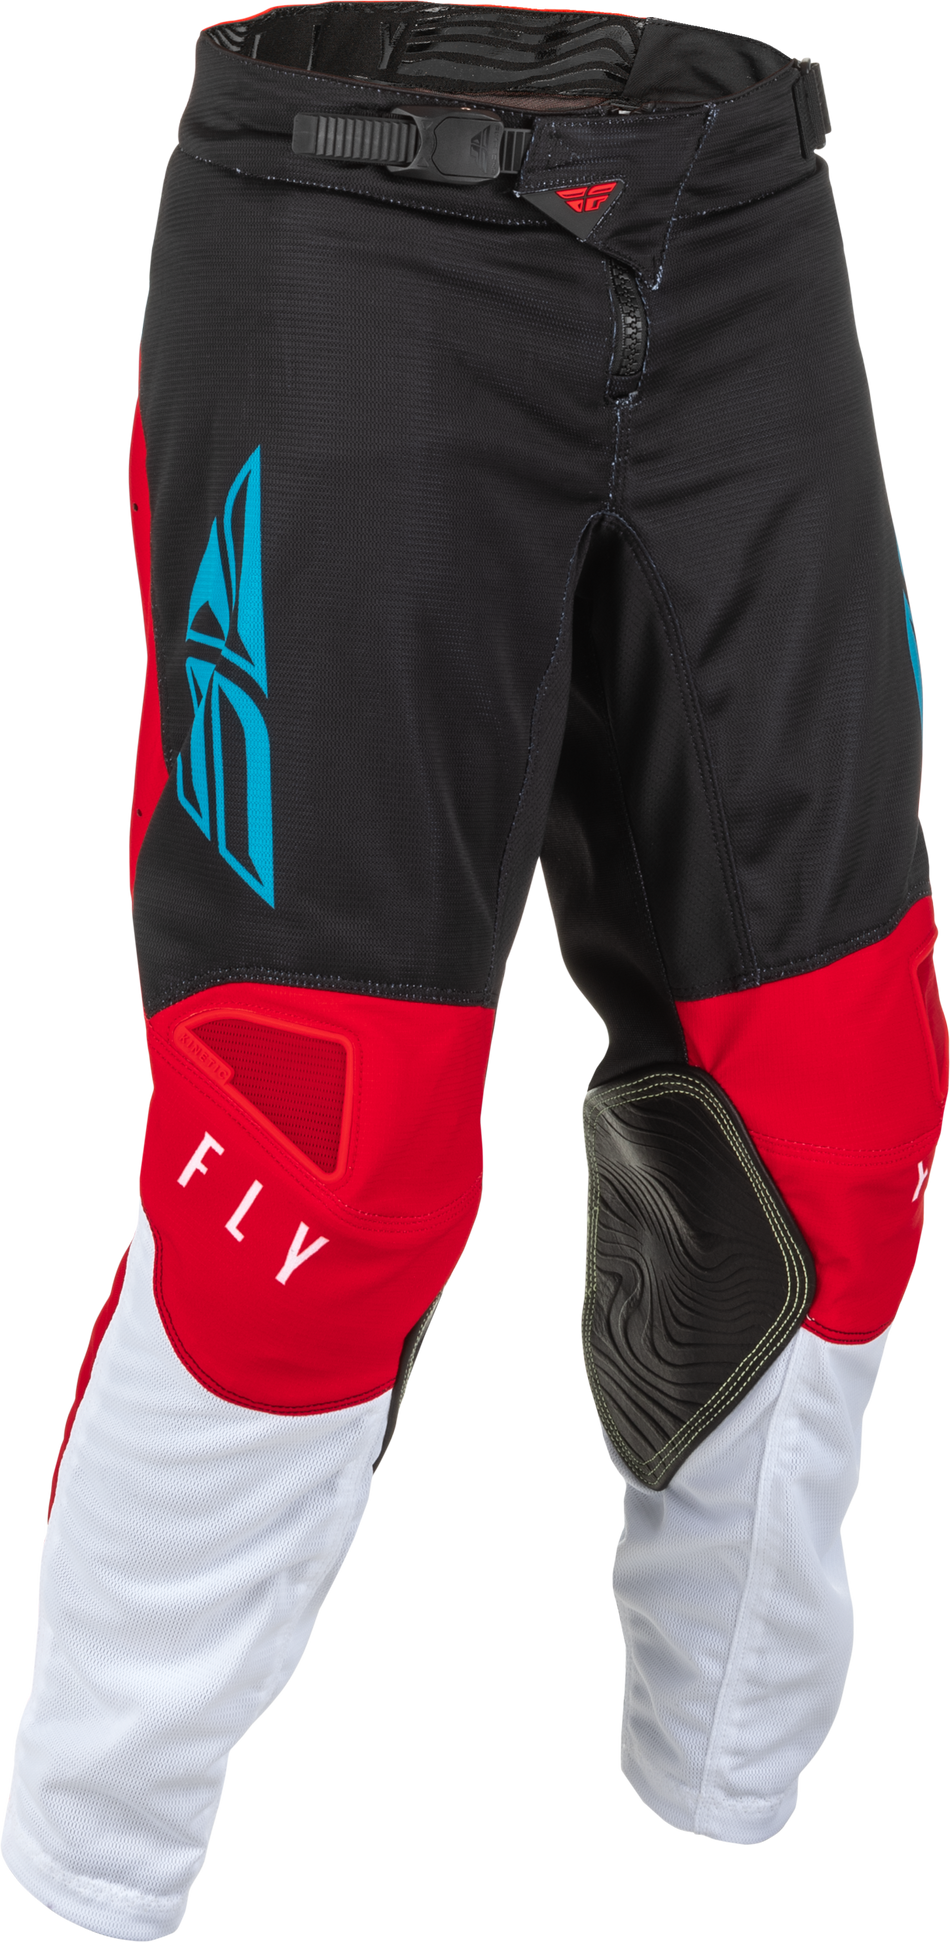 FLY RACING Youth Kinetic Mesh Pants Red/White/Blue Sz 22 375-32422